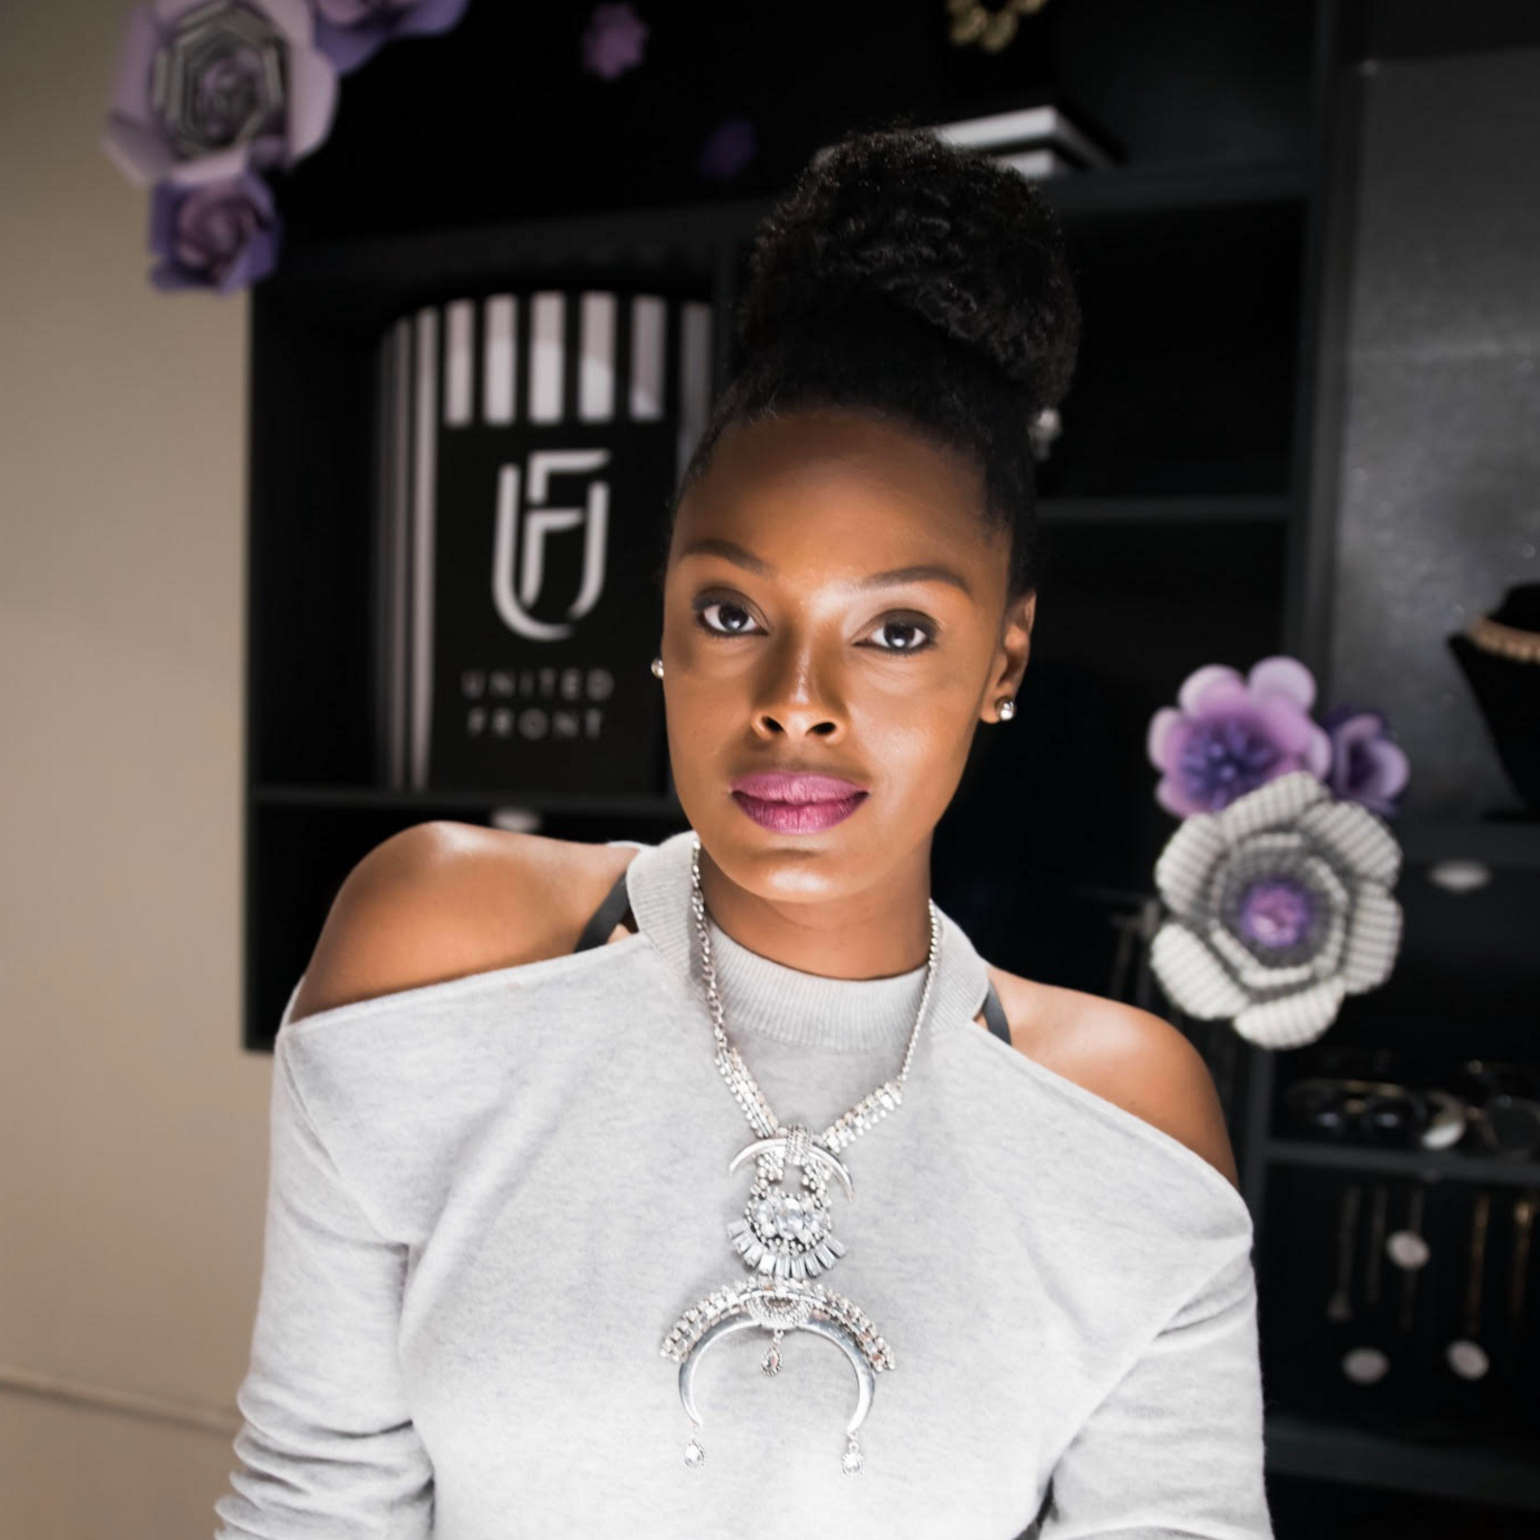 Jordette Singleton '05 runs her own boutique, UnitedFront, as part of the North End Collective in Midtown.